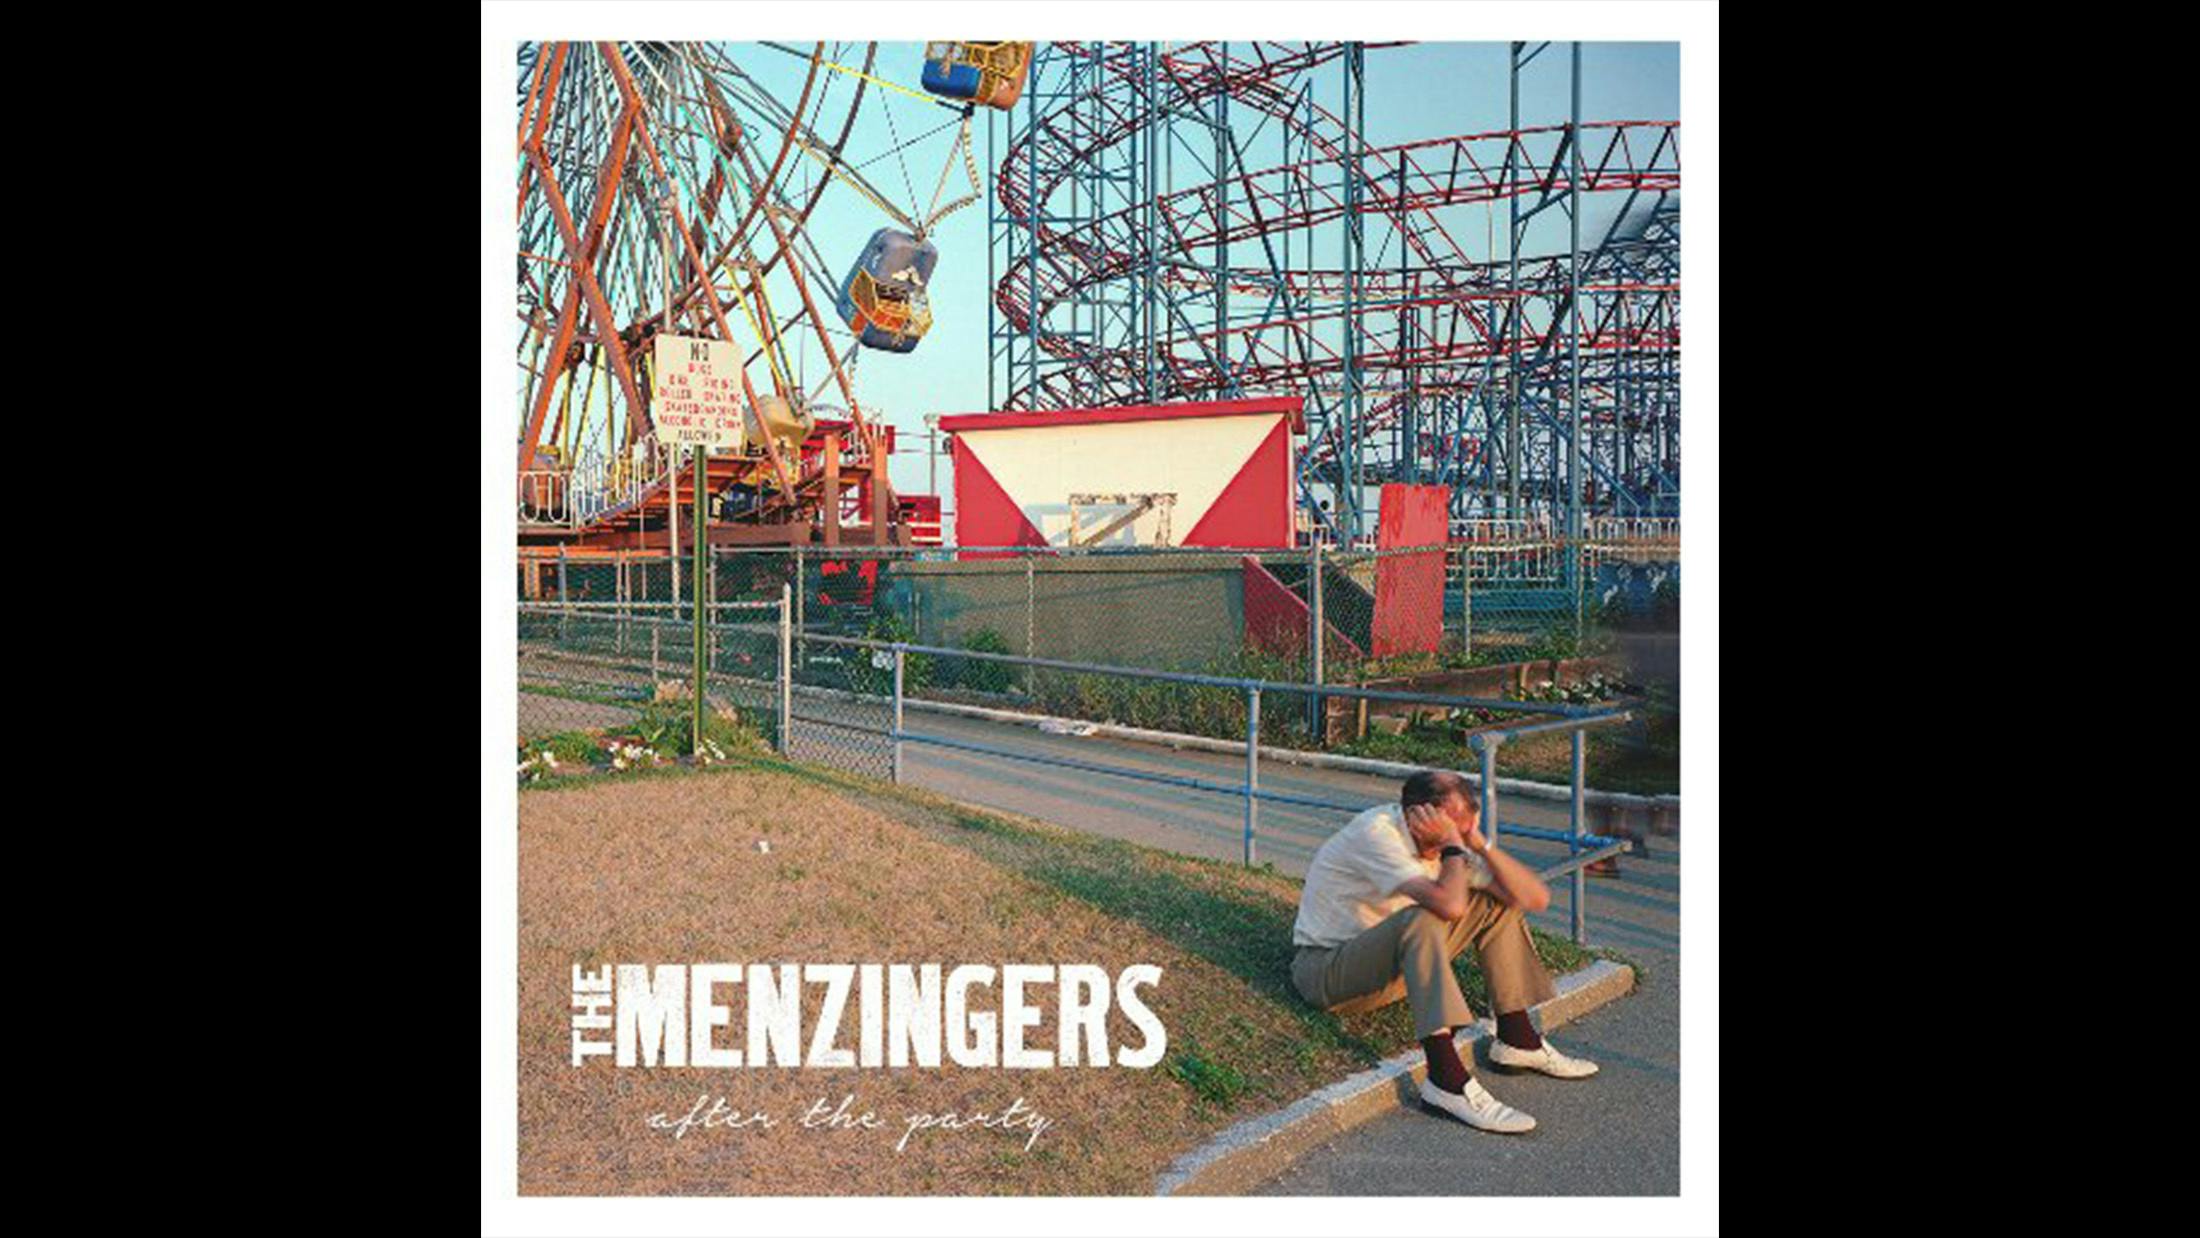 The Menzingers have long documented their lives with heart-on-sleeve zeal. Yet After The Party is the point where they best managed to get the personal and the universal to connect. Like a coming-of-age novel, their fifth album looks back on life in a band, and by telling their own story, they frequently told that of their fans, too.